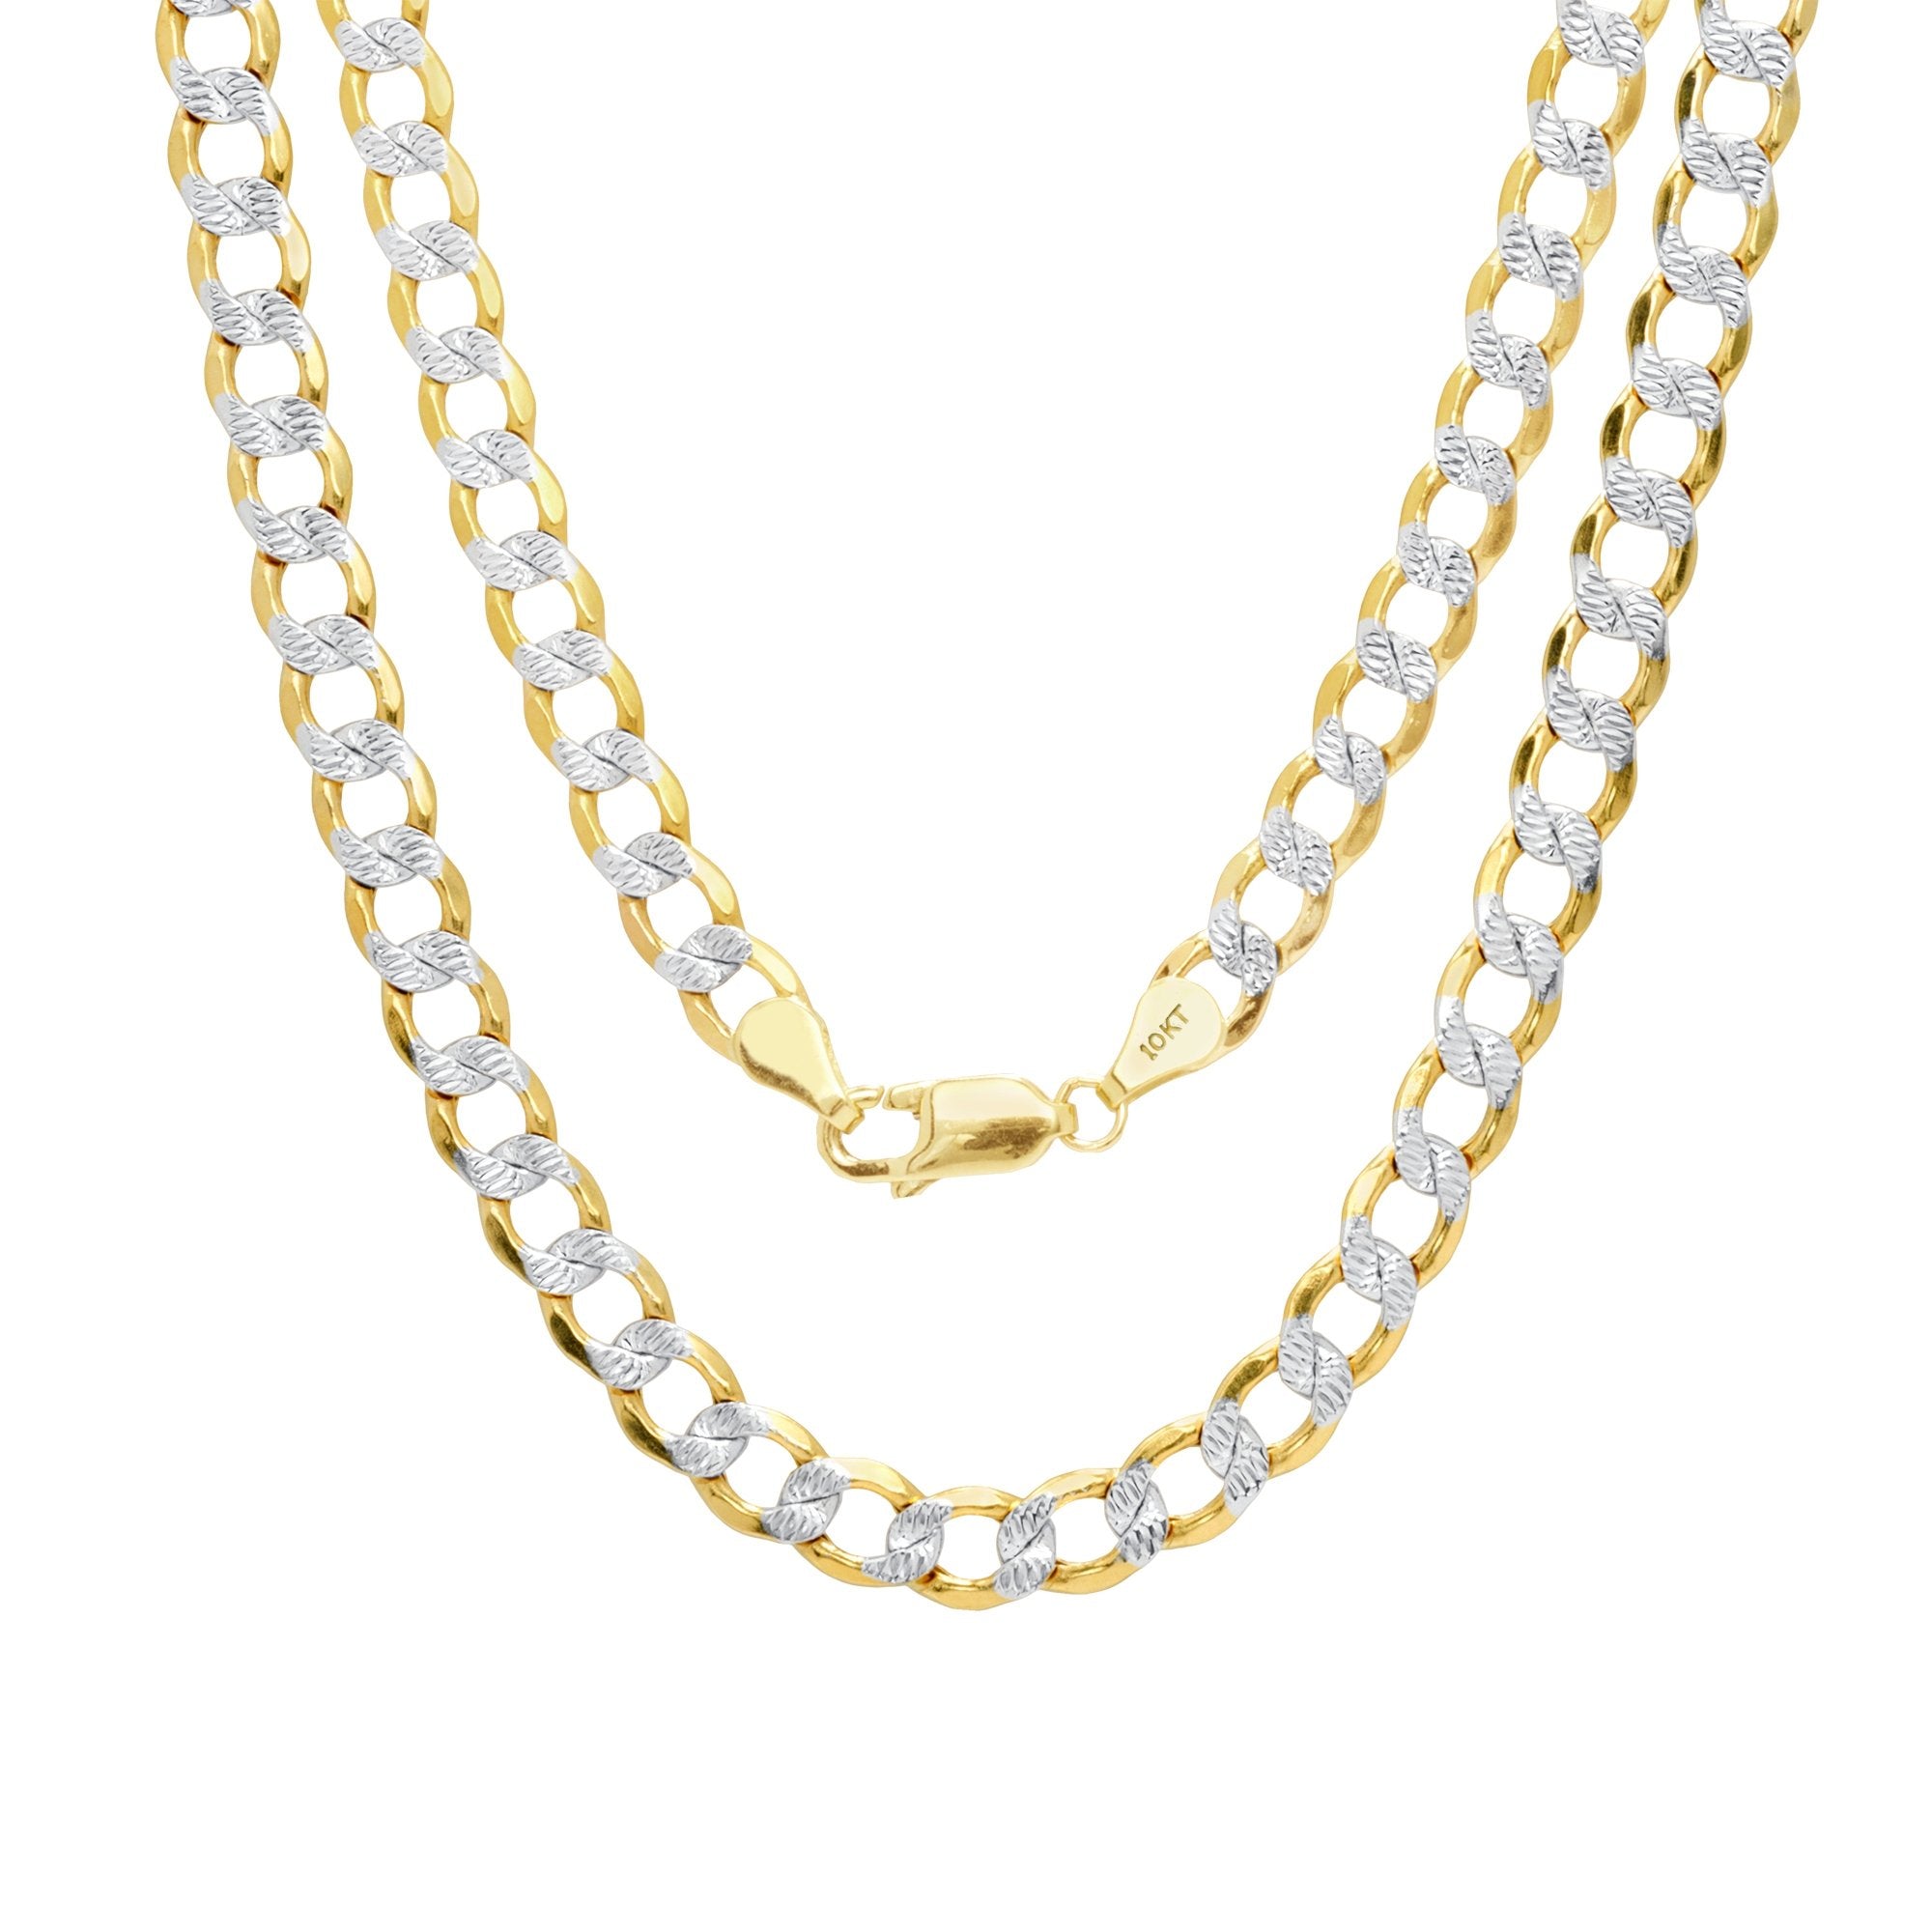 7.5MM Yellow Gold Flat Pave Curb Chain .925 Solid Sterling Silver 8"- 32" Inches